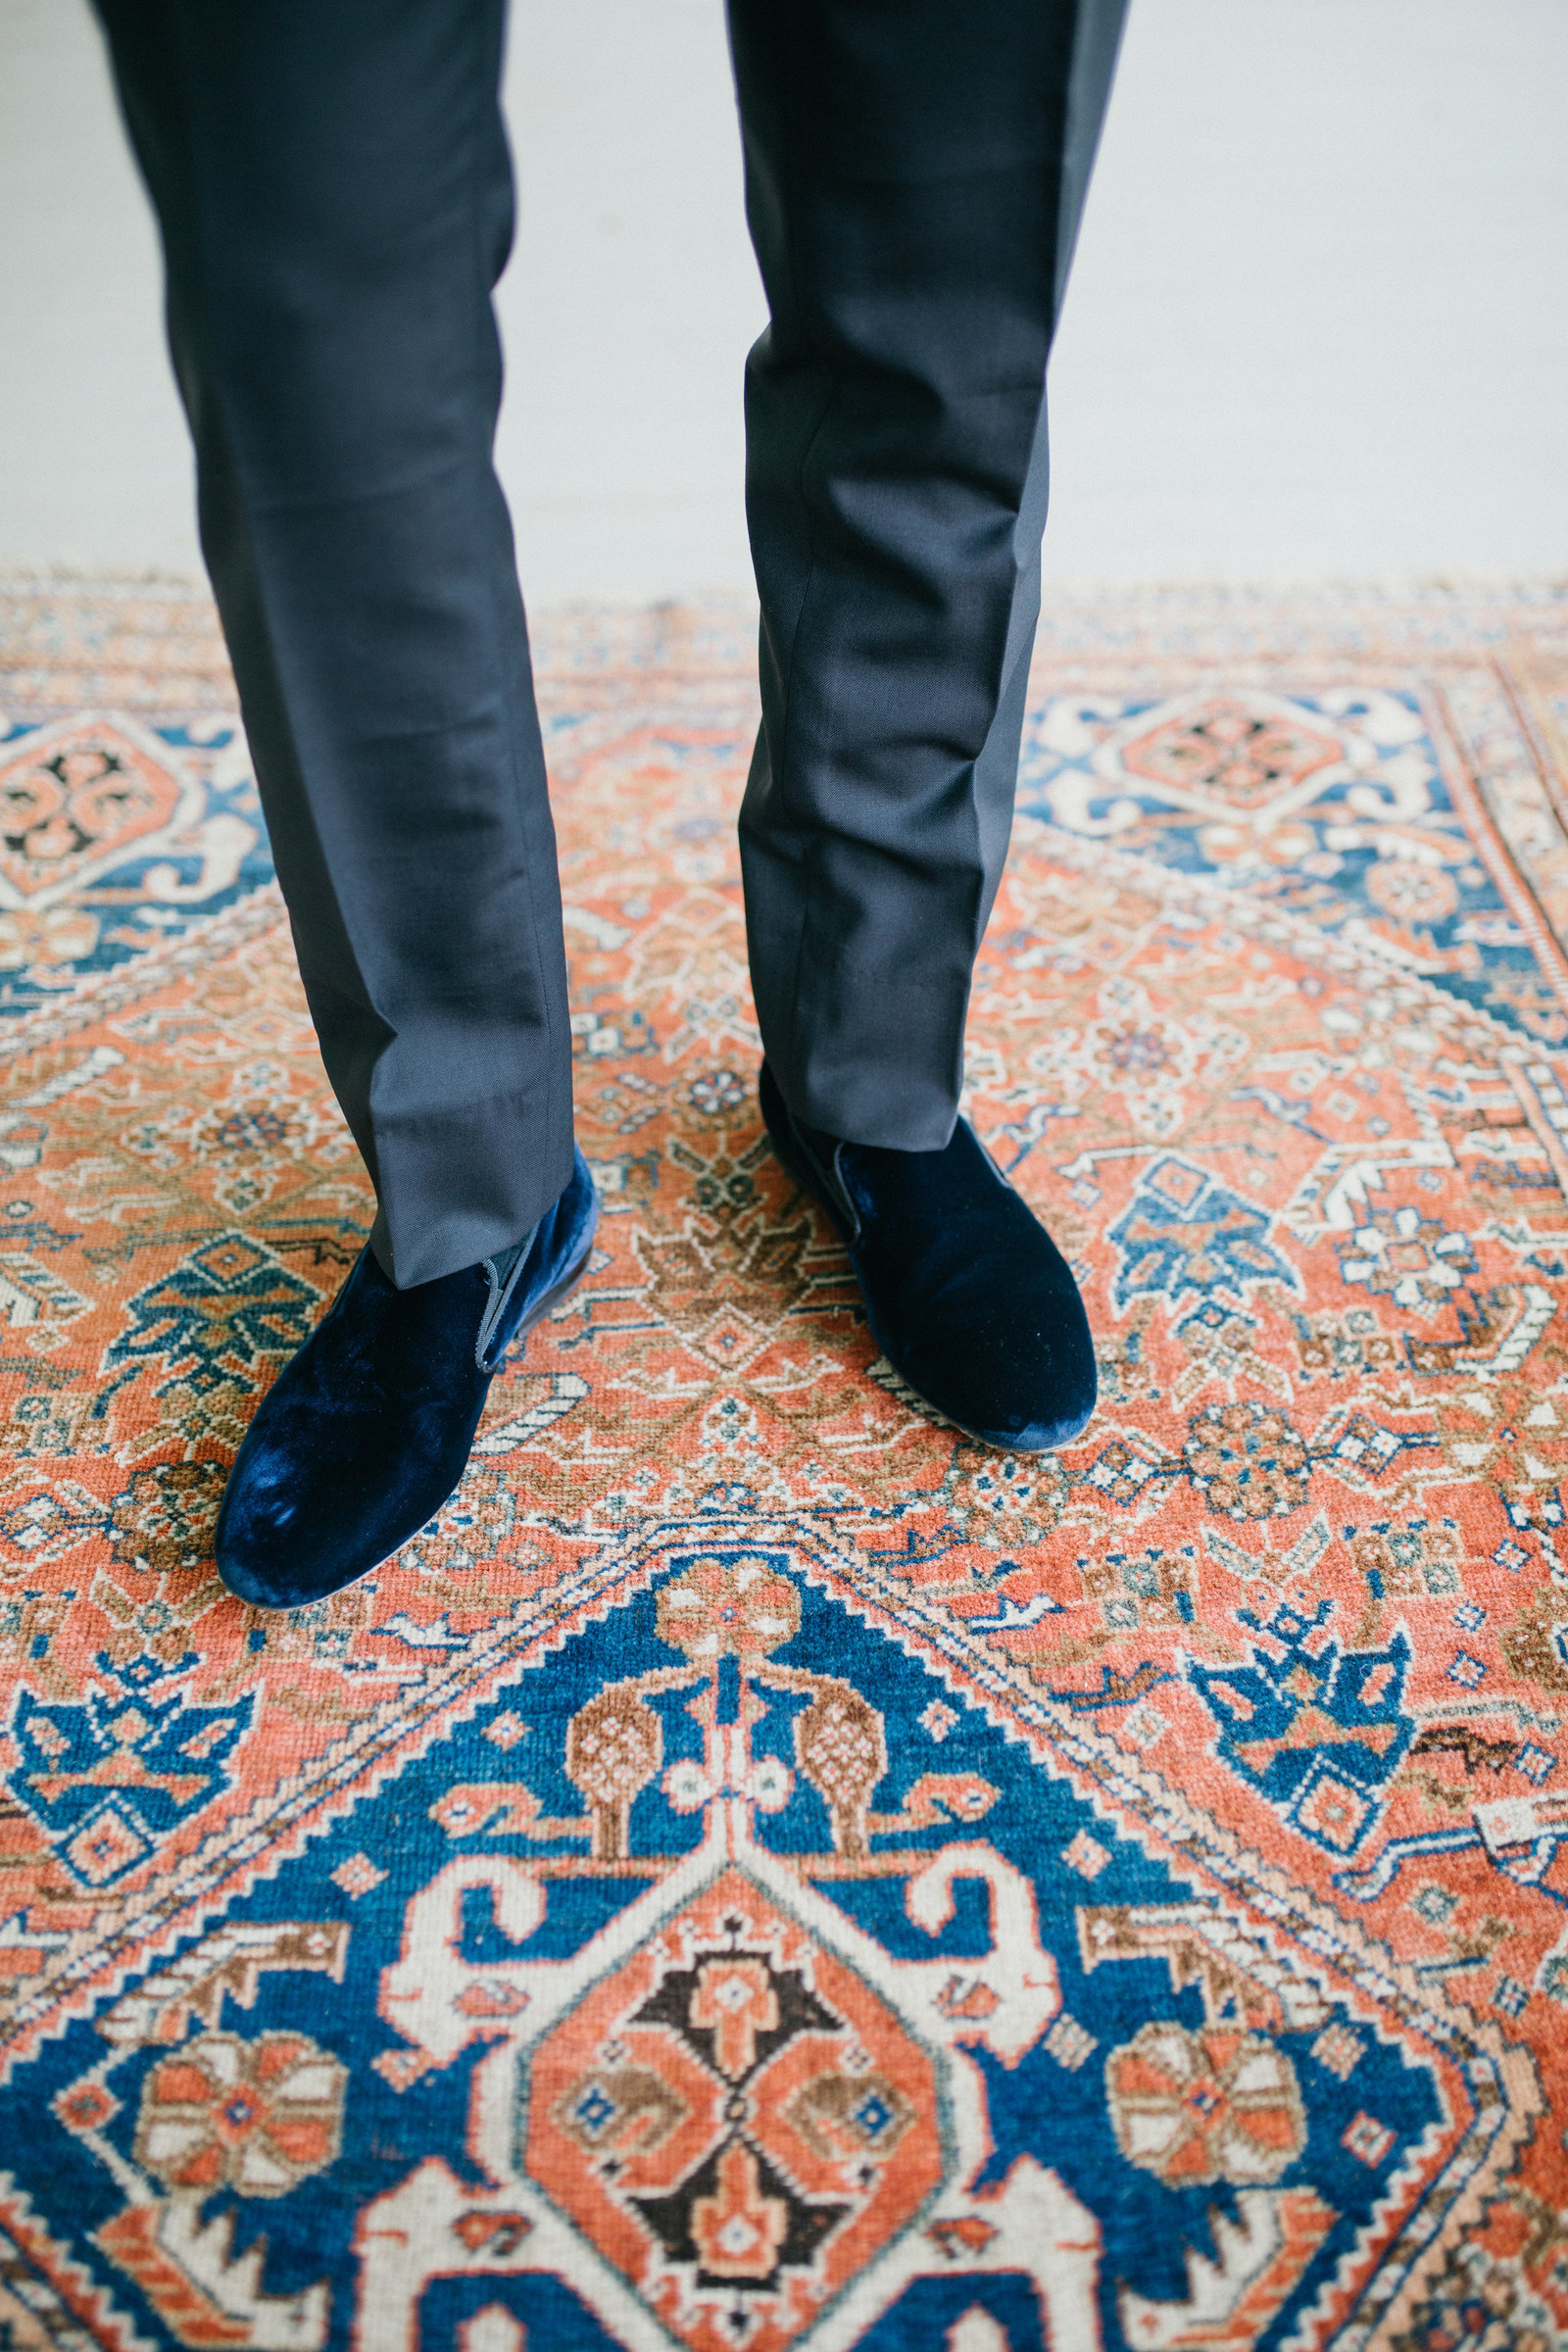 This stylish groom wore blue velvet shoes on his wedding day.